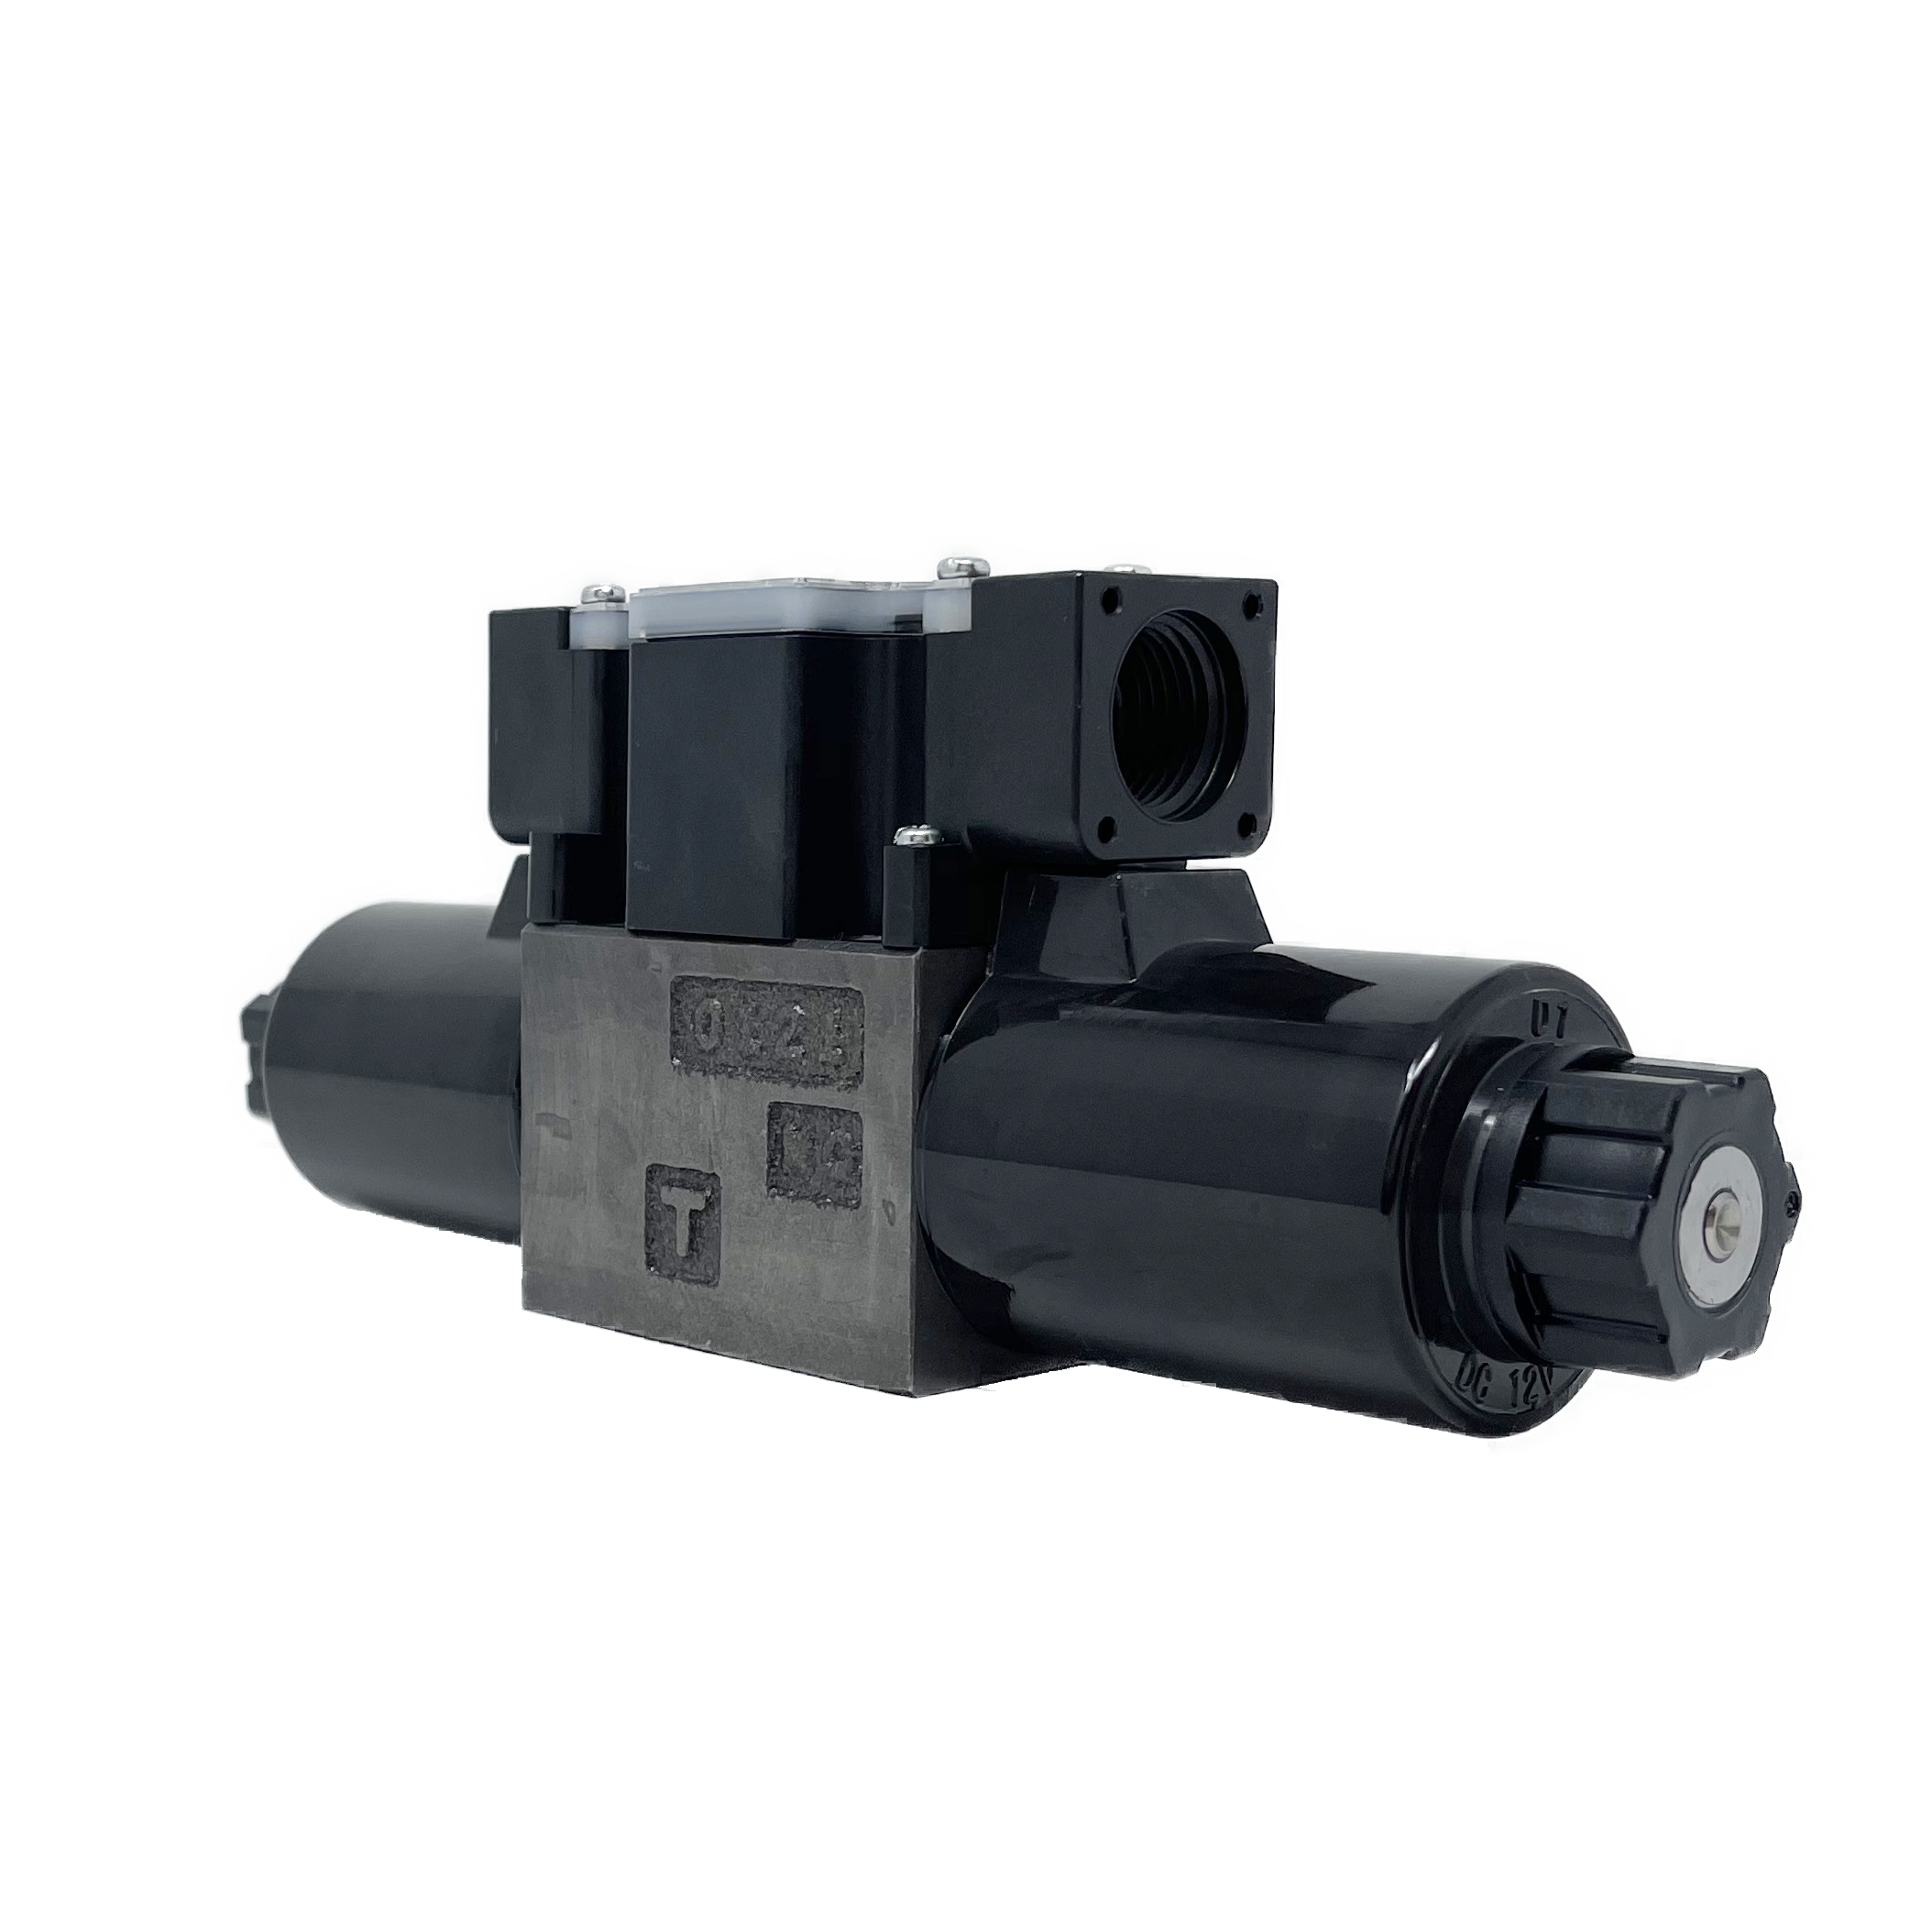 SS-G01-C4-R-D1-E31 : Nachi Solenoid Valve, 3P4W, D03 (NG6), 13.2GPM, 5075psi, All Ports Open Neutral, 12 VDC, Wiring Box with Lights